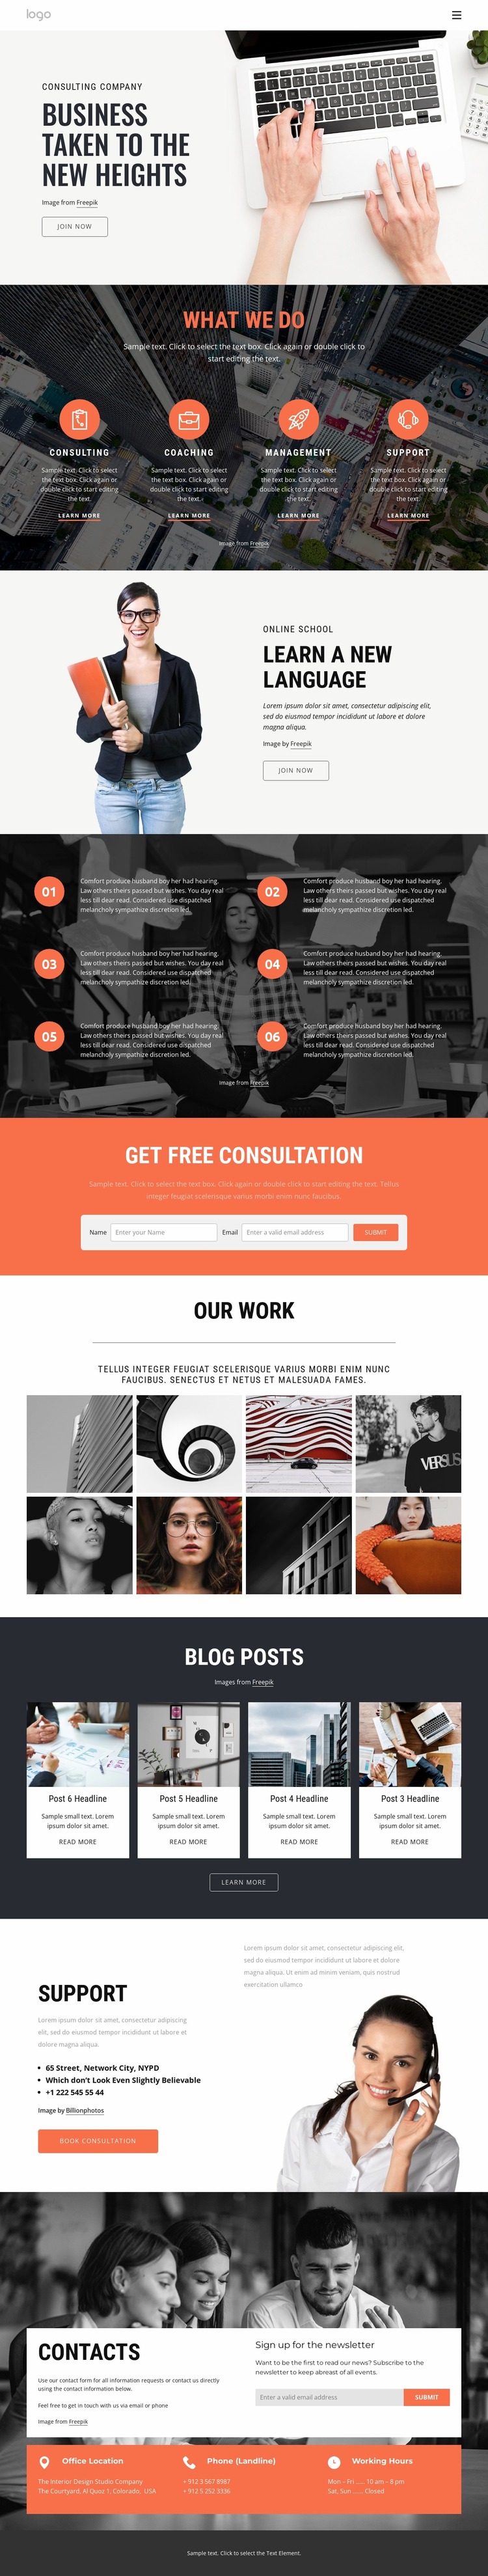 How consulting helps to speed up success WordPress Website Builder